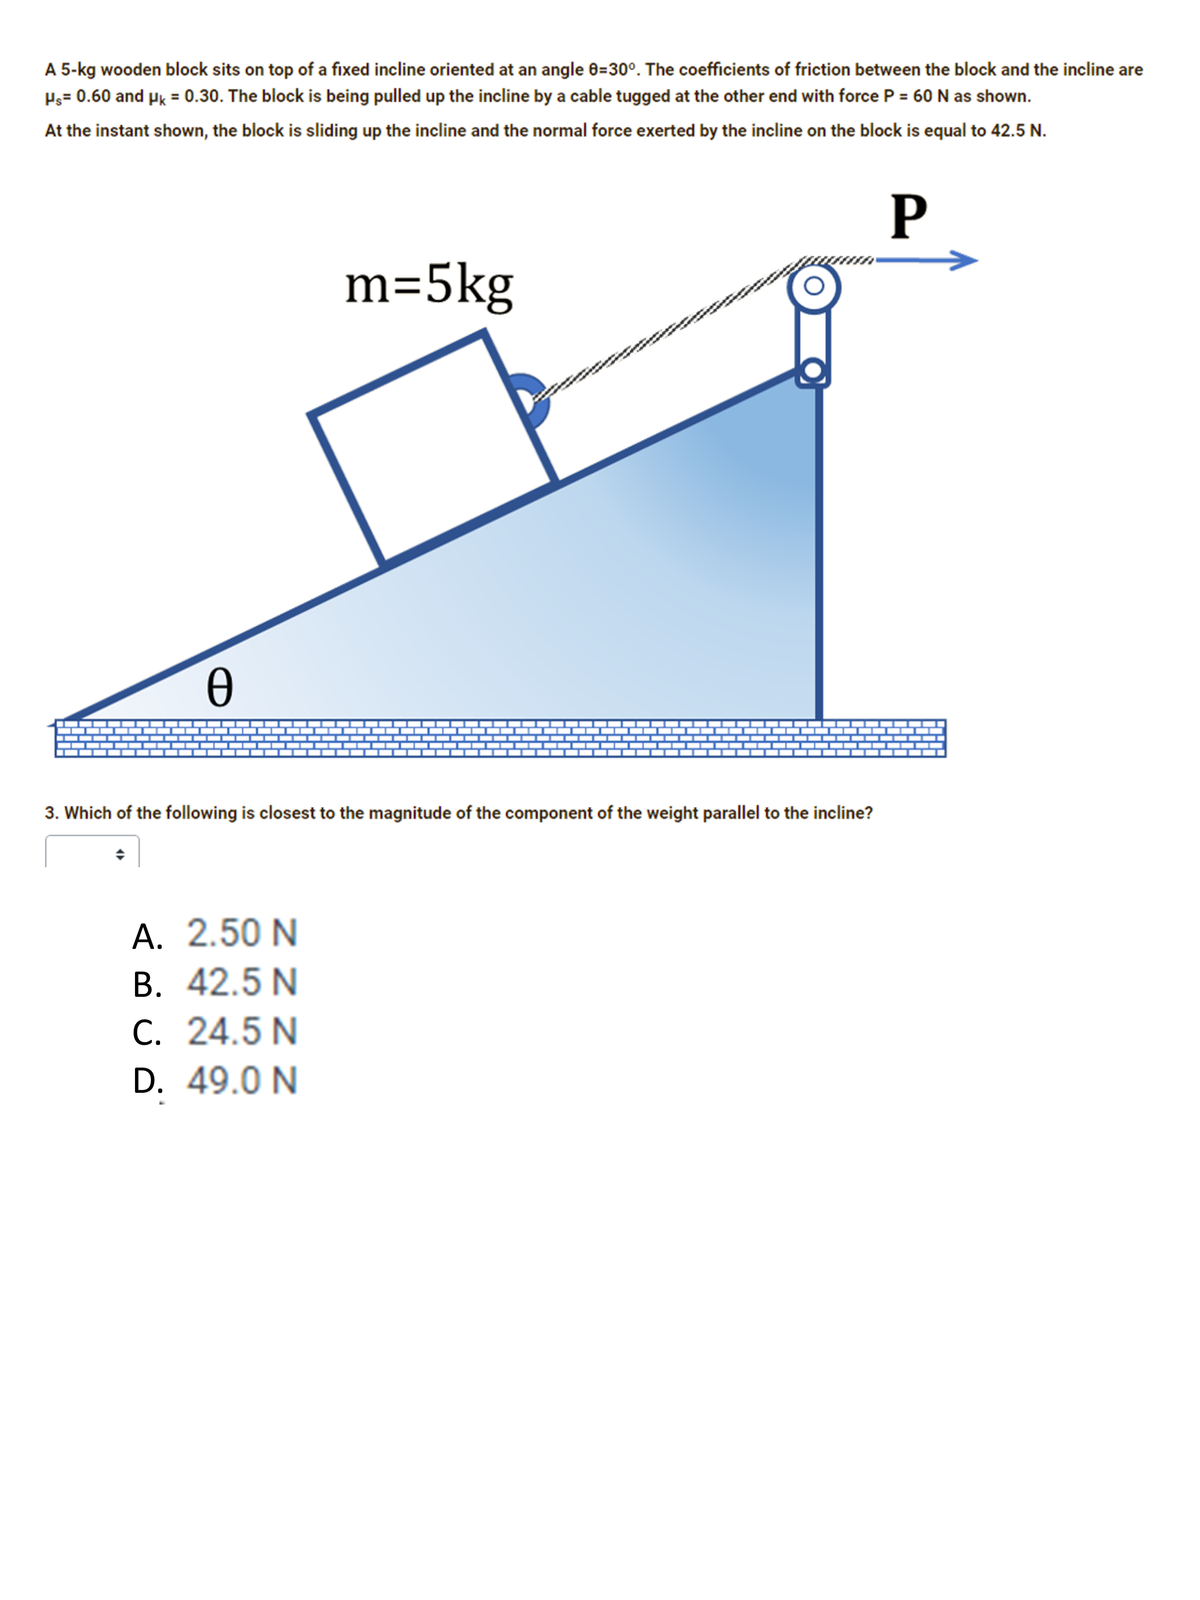 A 5-kg wooden block sits on top of a fixed incline oriented at an angle 0=30°. The coefficients of friction between the block and the incline are
Ps= 0.60 and Hk = 0.30. The block is being pulled up the incline by a cable tugged at the other end with force P = 60 N as shown.
At the instant shown, the block is sliding up the incline and the normal force exerted by the incline on the block is equal to 42.5 N.
P
m=5kg
3. Which of the following is closest to the magnitude of the component of the weight parallel to the incline?
A. 2.50 N
В. 42.5 N
C. 24.5 N
А.
С.
D. 49.0 N
